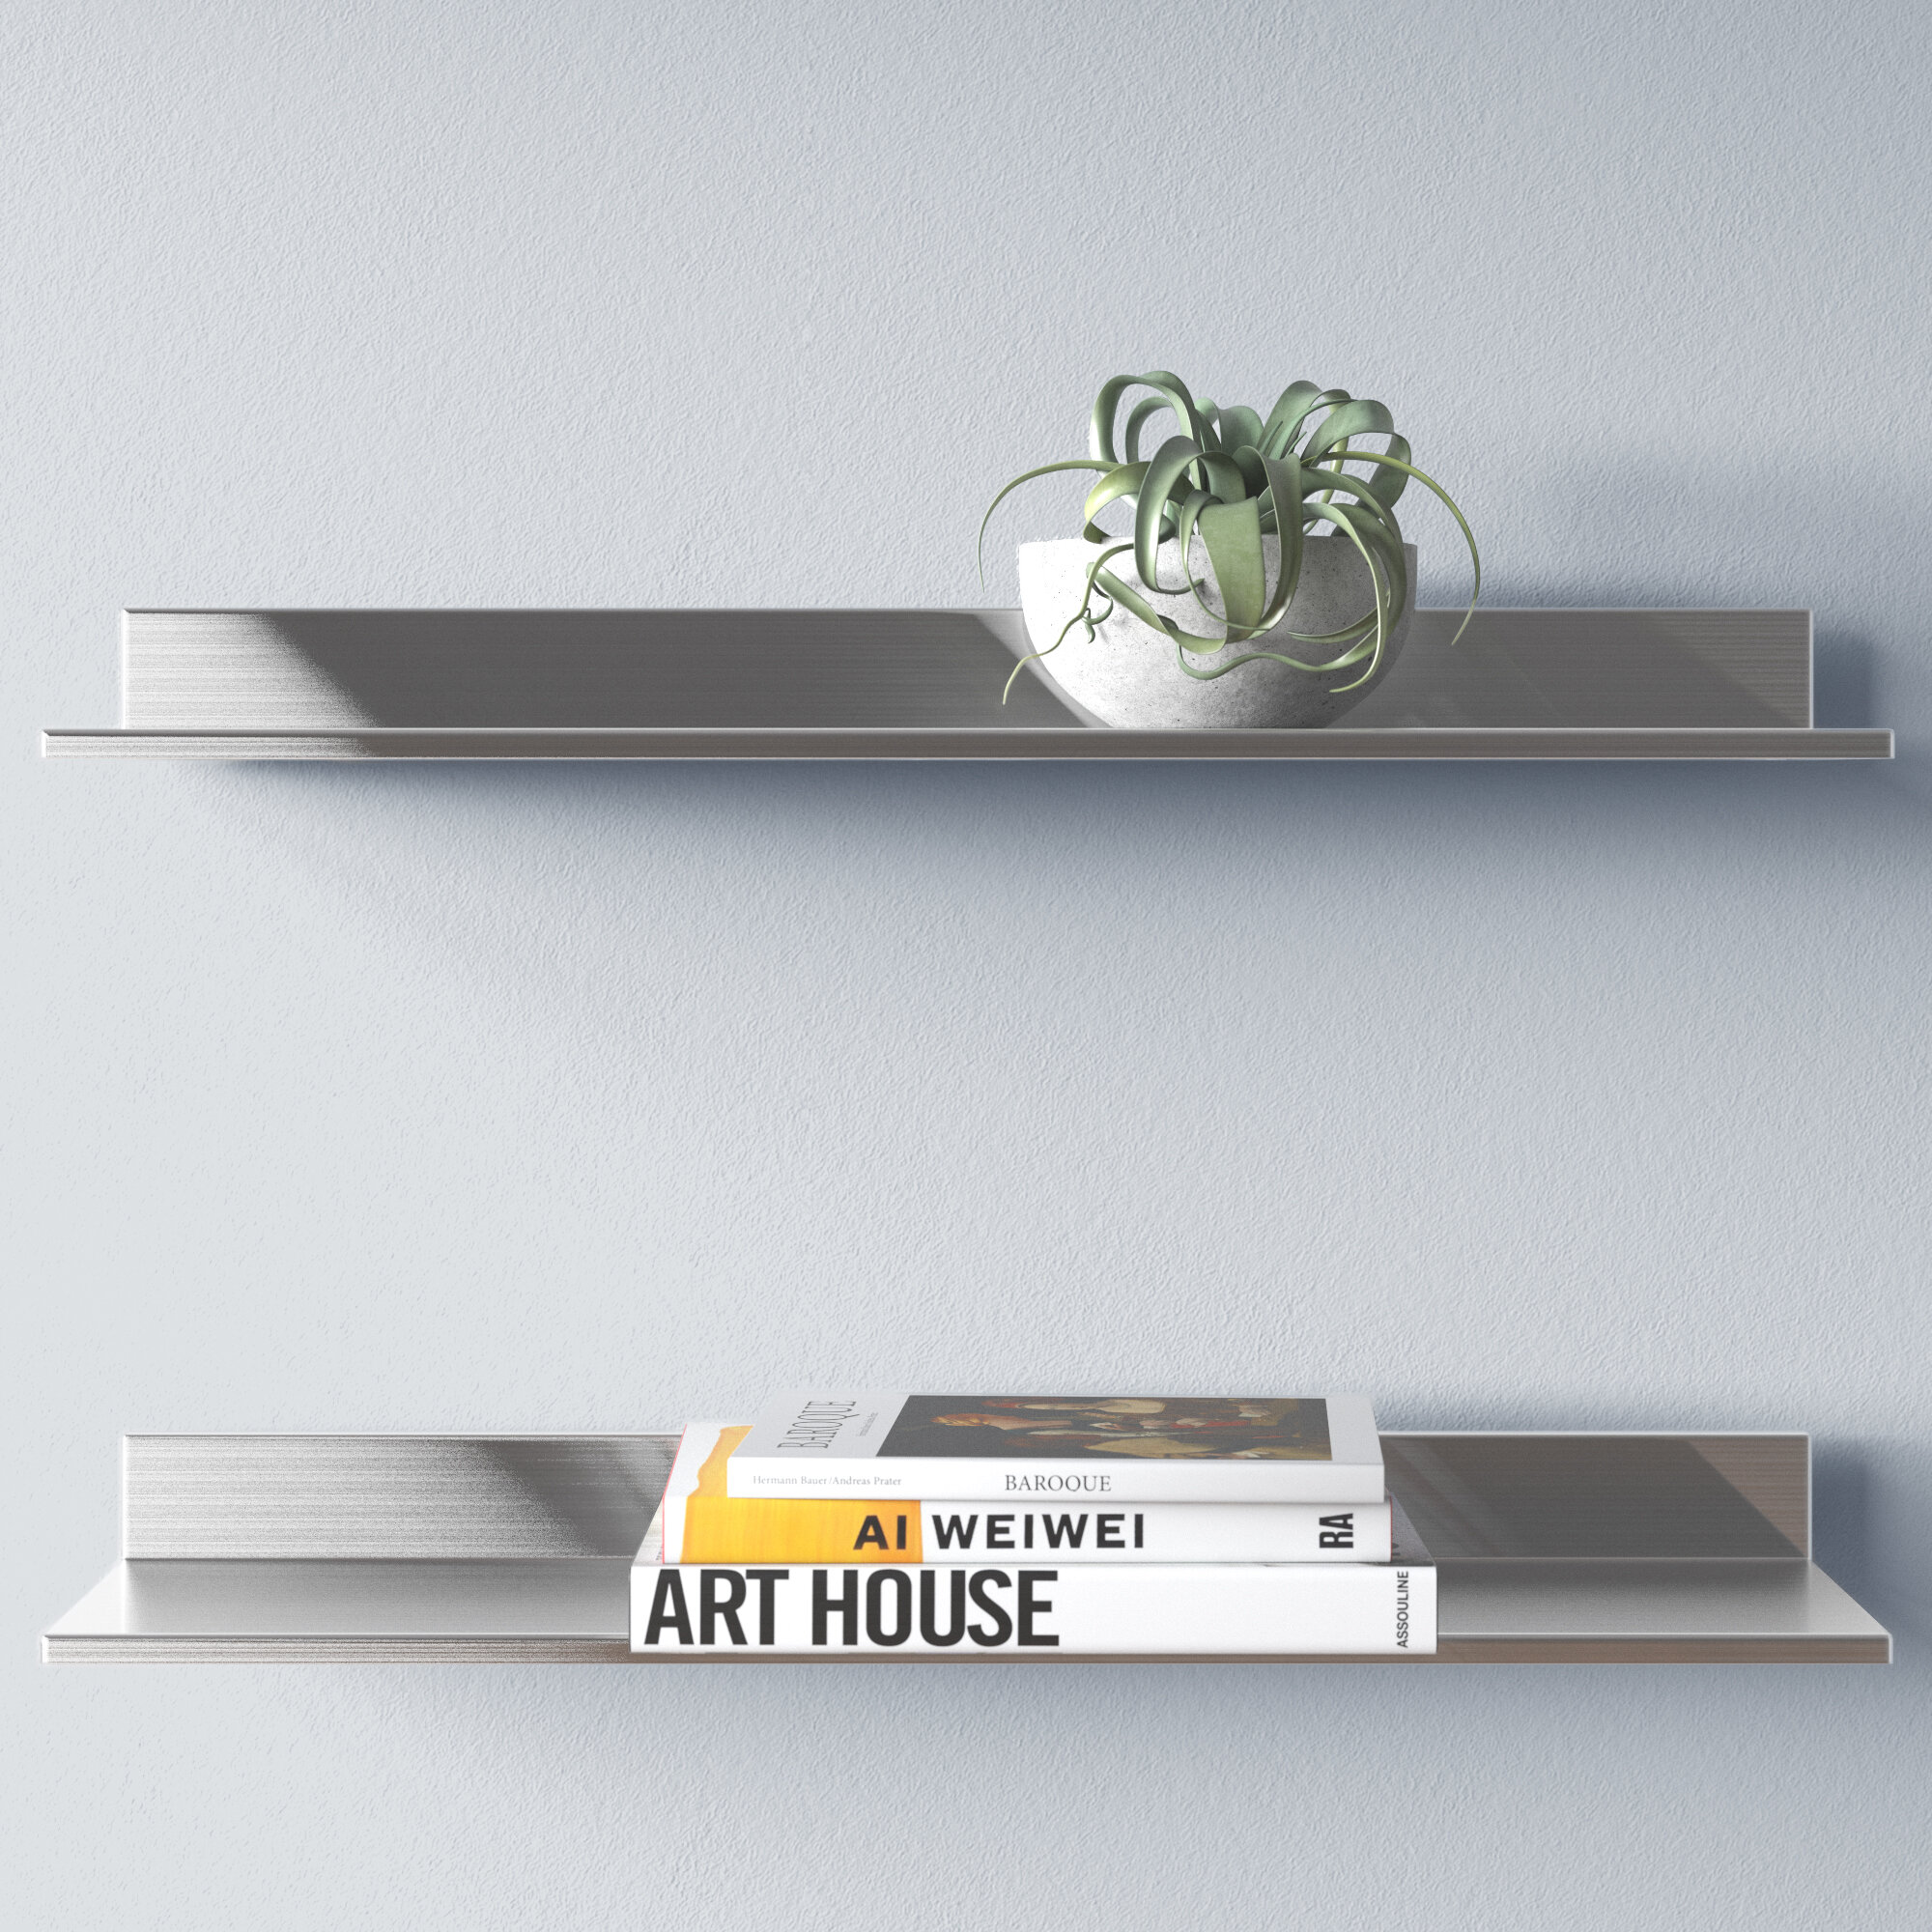 56 in. W x 2 in. D Modern Wall Mount Floating Shelves Long Narrow Picture Ledge (Set of 2) Decorative Wall Shelf